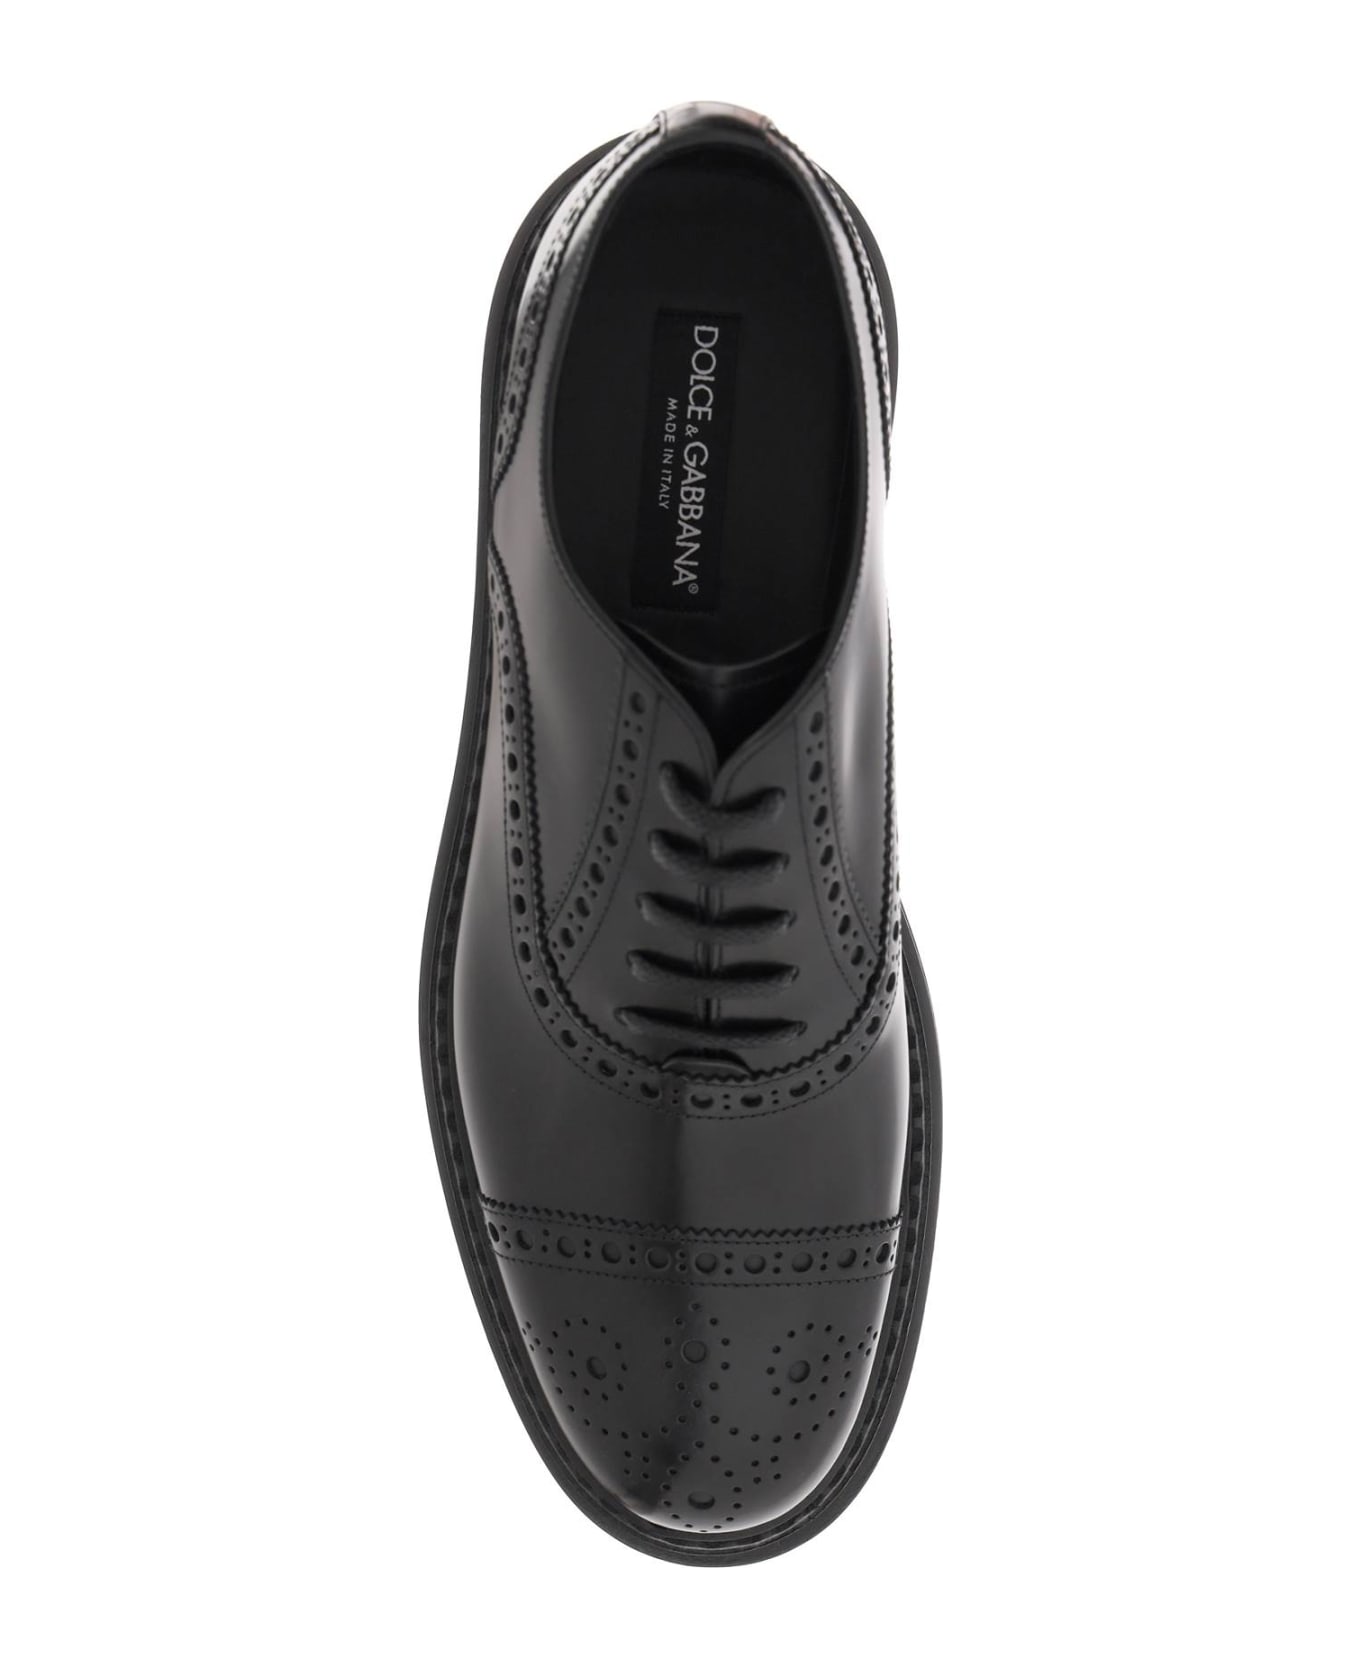 Dolce & Gabbana Leather Lace Up Shoes - Black ローファー＆デッキシューズ